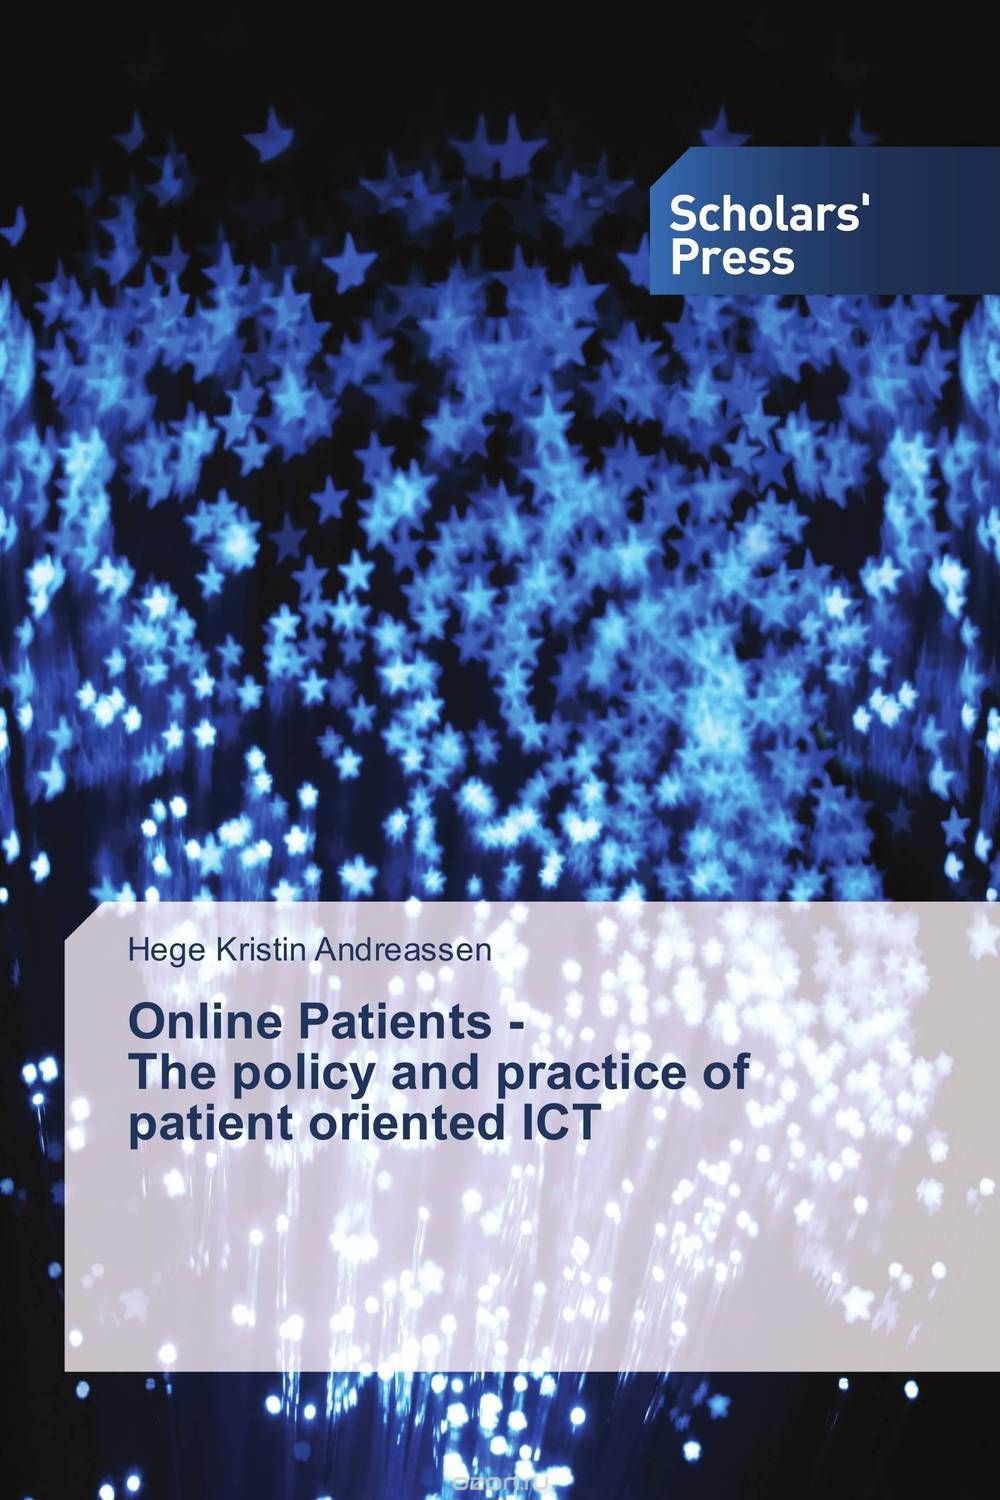 Online Patients - The policy and practice of patient oriented ICT